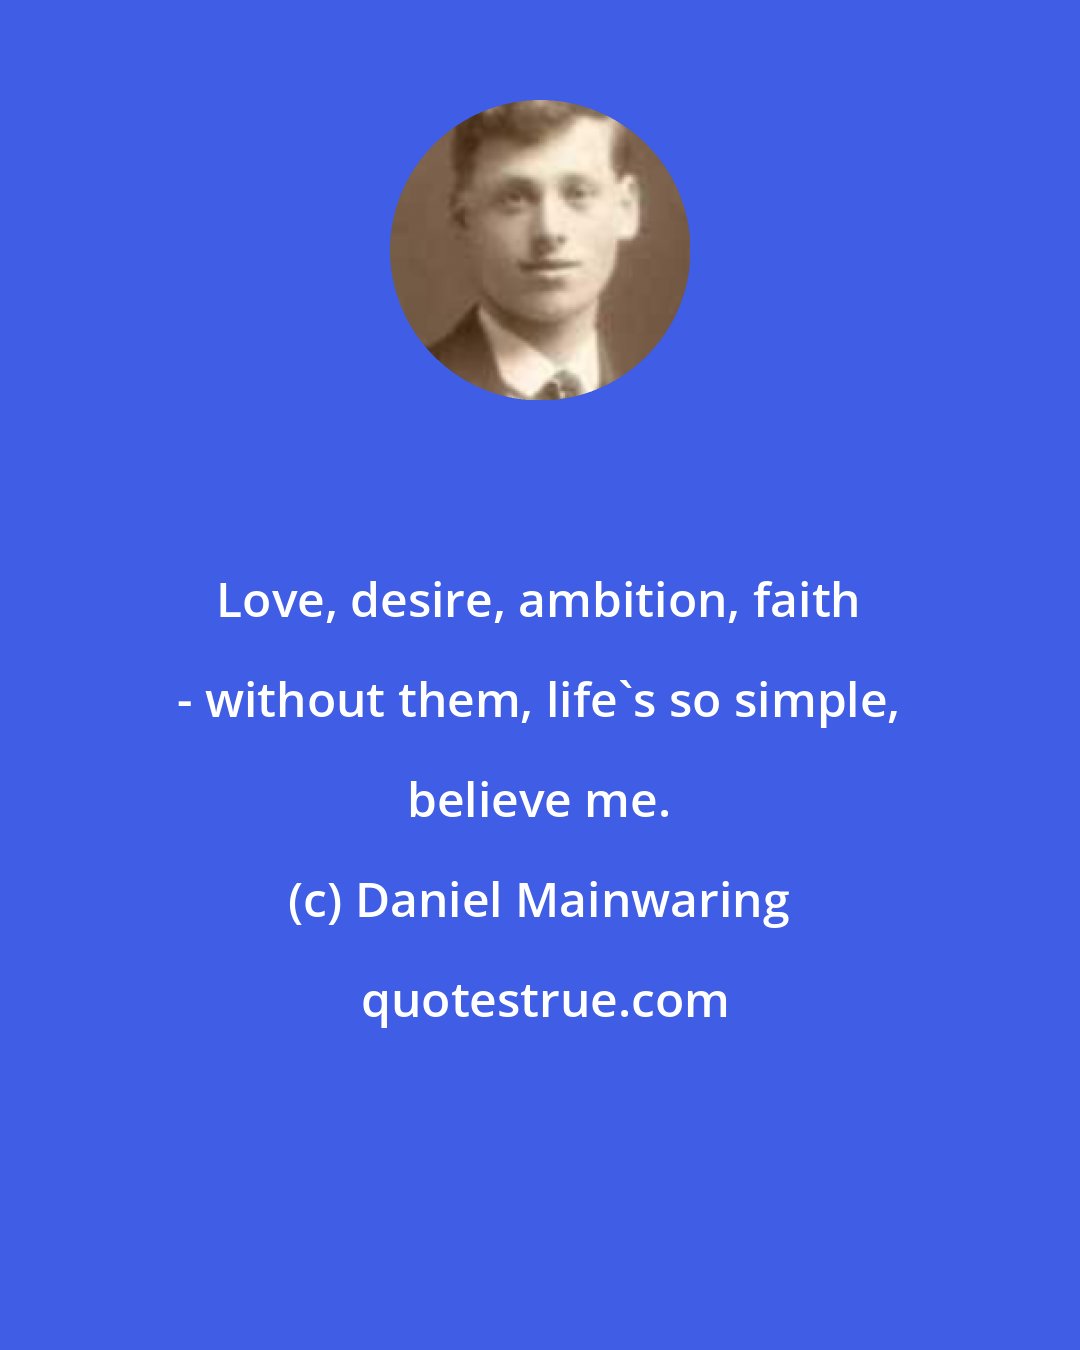 Daniel Mainwaring: Love, desire, ambition, faith - without them, life's so simple, believe me.